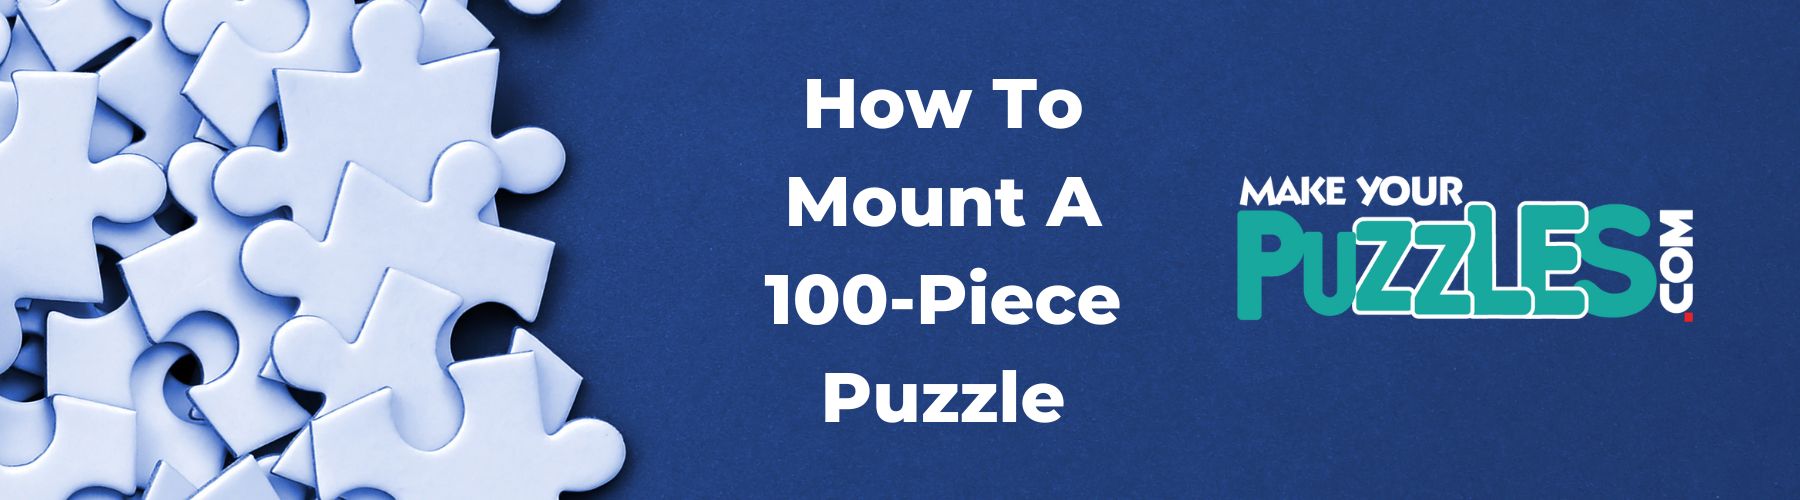 How to mount a 100-piece puzzle | MakeYourPuzzles